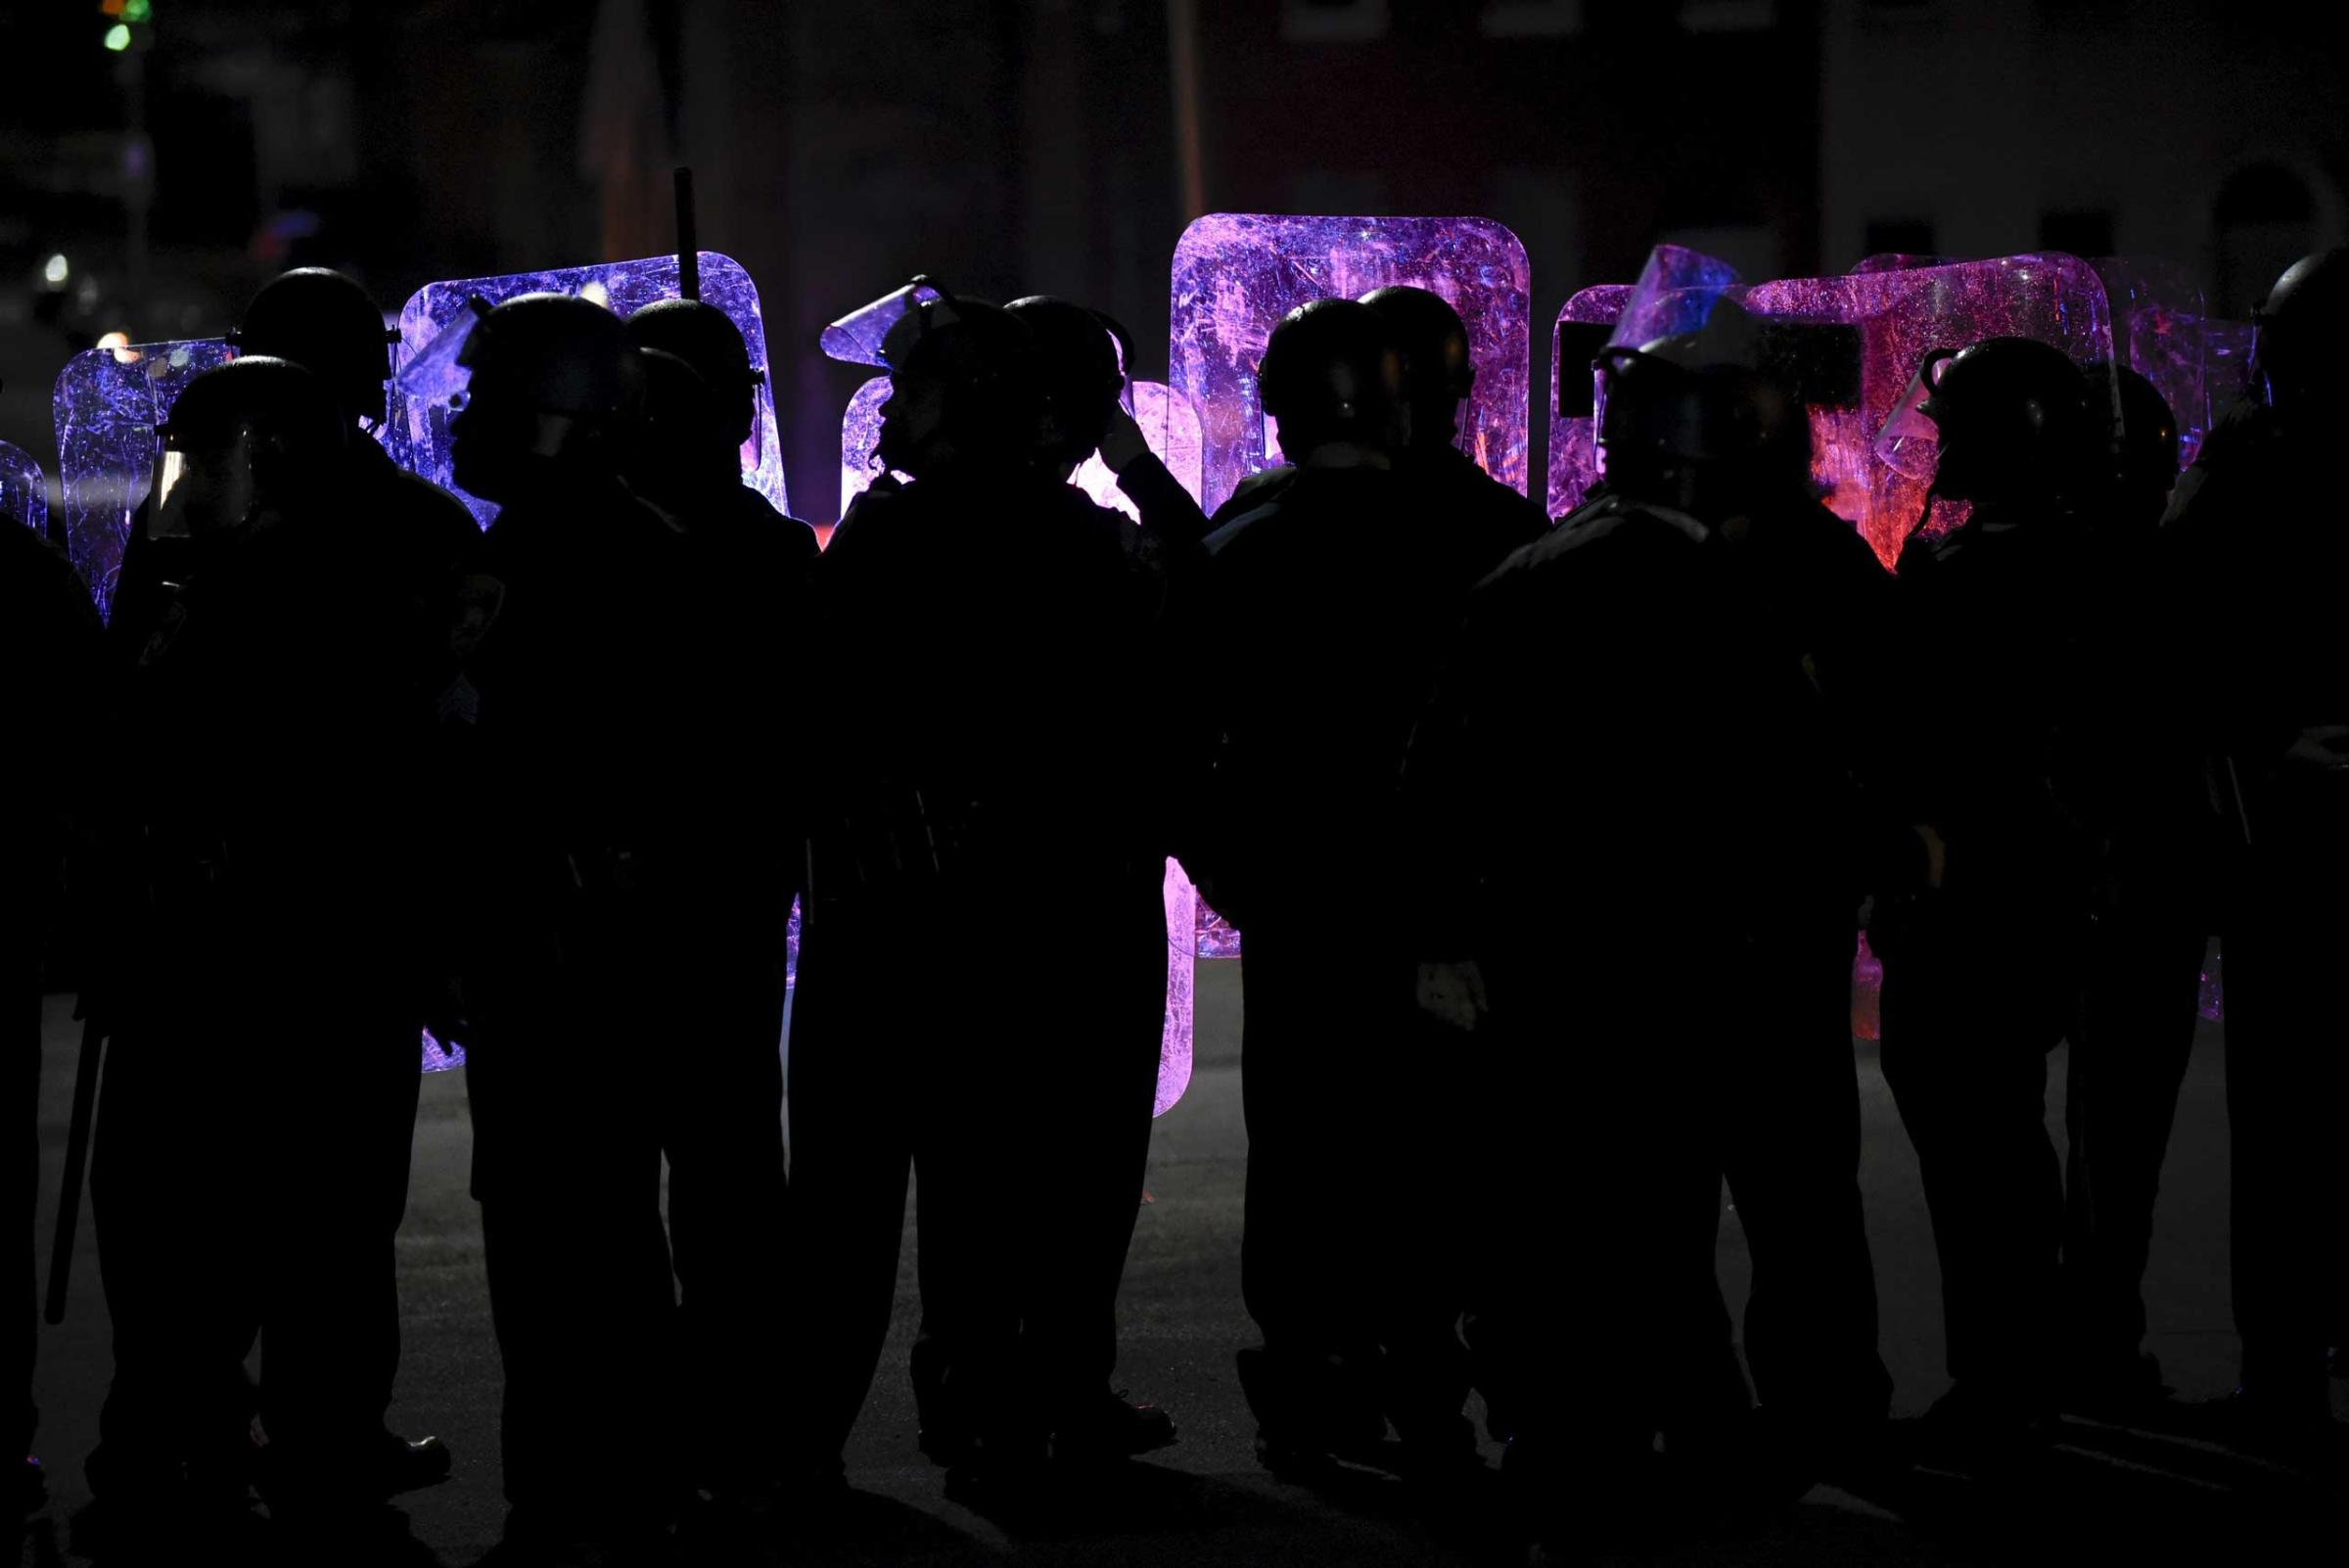 Law enforcement officers stand guard near Baltimore Police Department Western District in Baltimore on April 25, 2015.